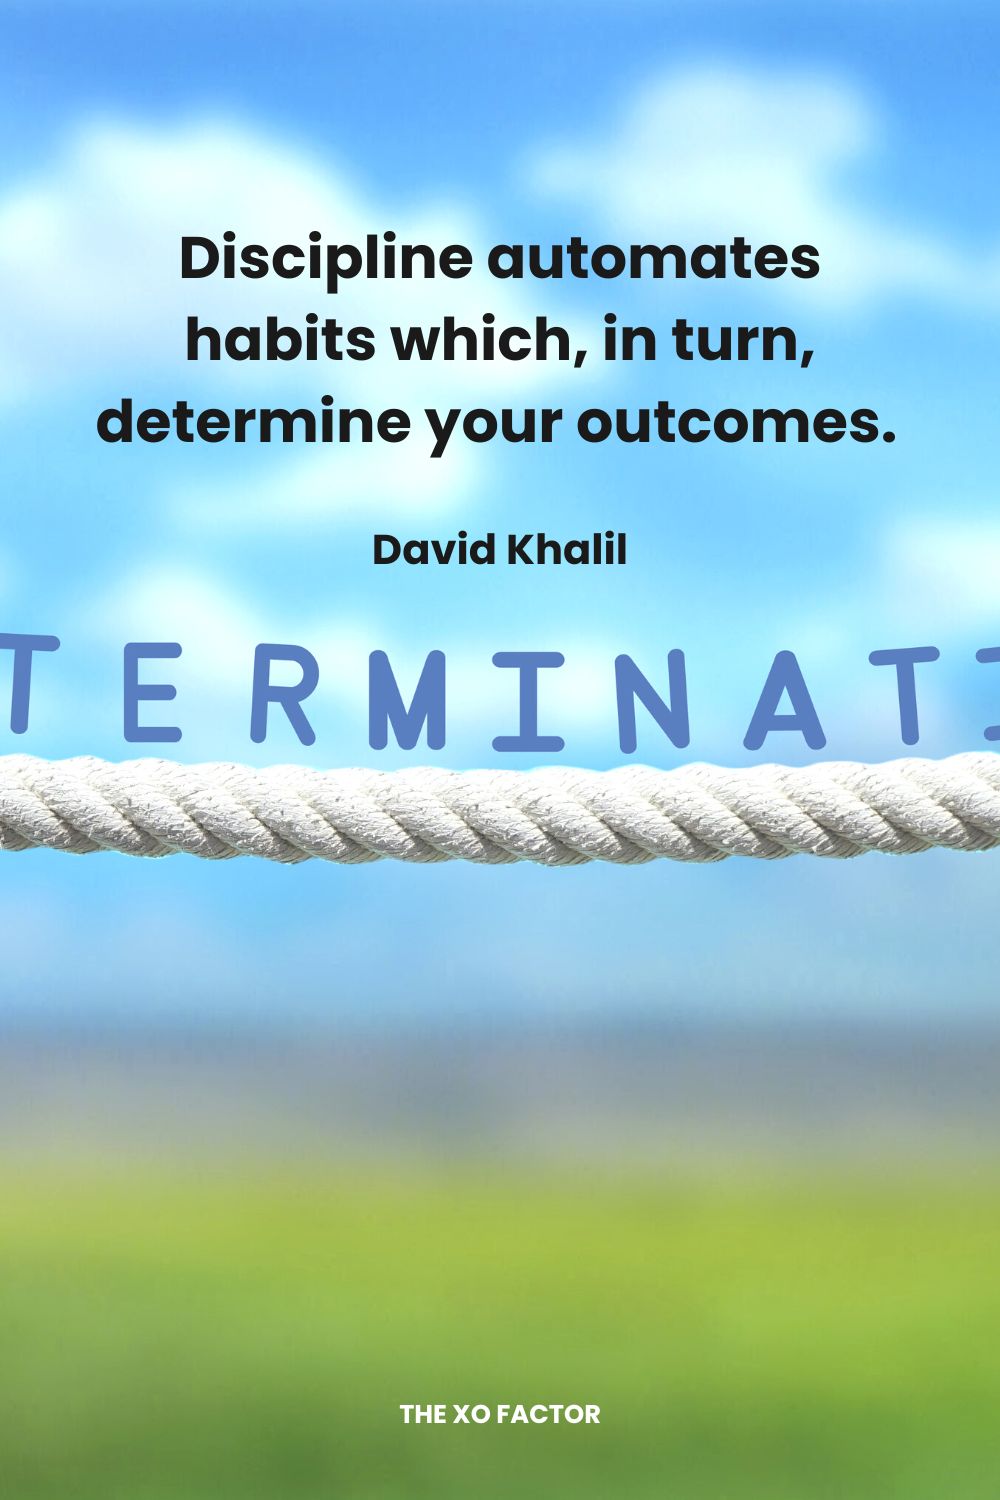 Discipline automates habits which, in turn, determine your outcomes.  David Khalil